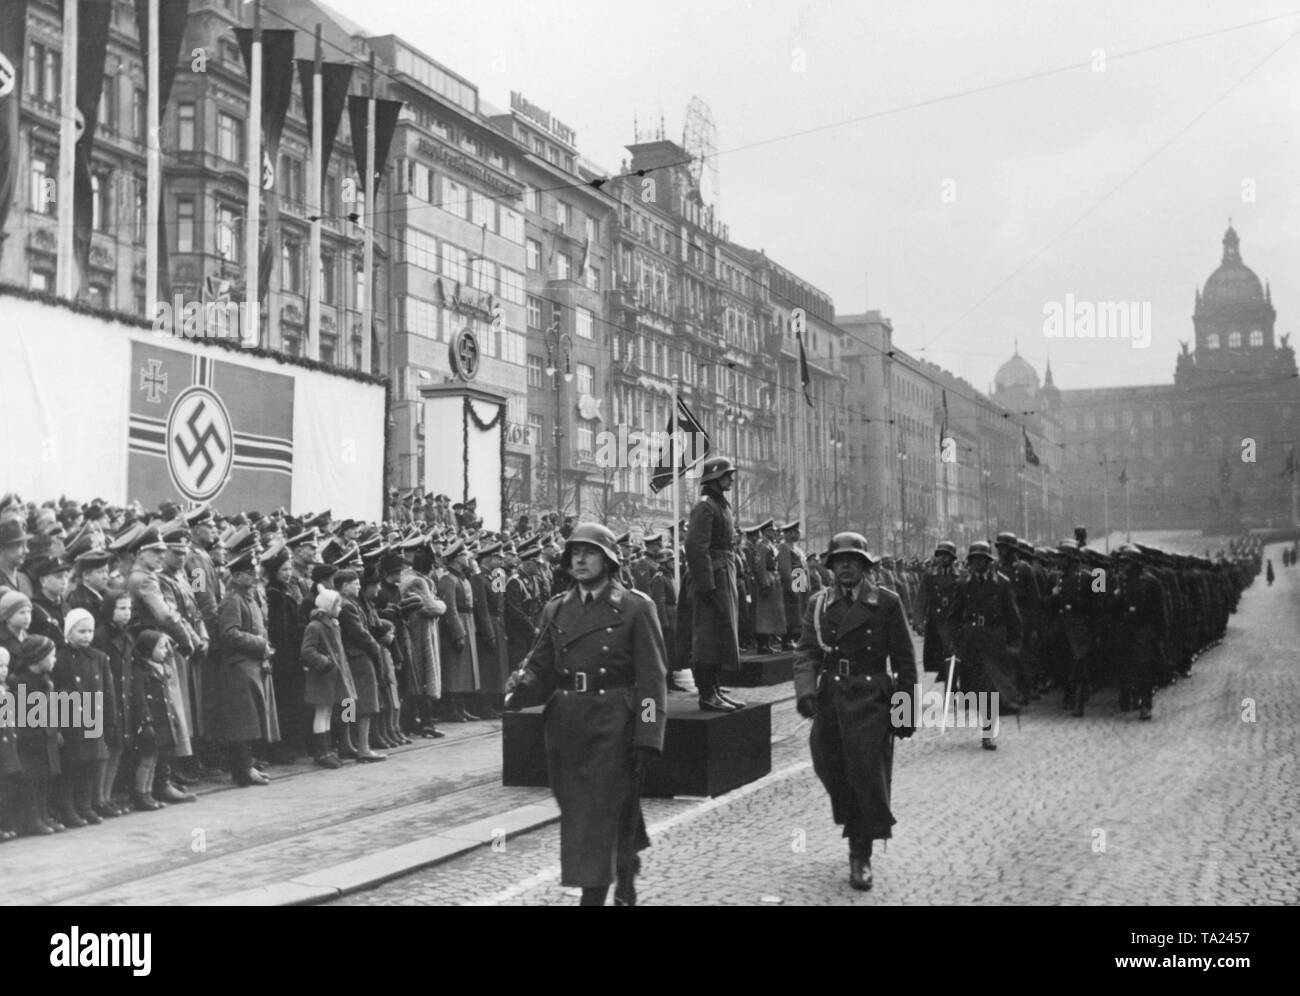 For the one-year anniversary of the Protectorate of Bohemia and Moravia, the Wehrmacht Day takes place at Wenceslas Square. A military parade takes place during the event. Stock Photo